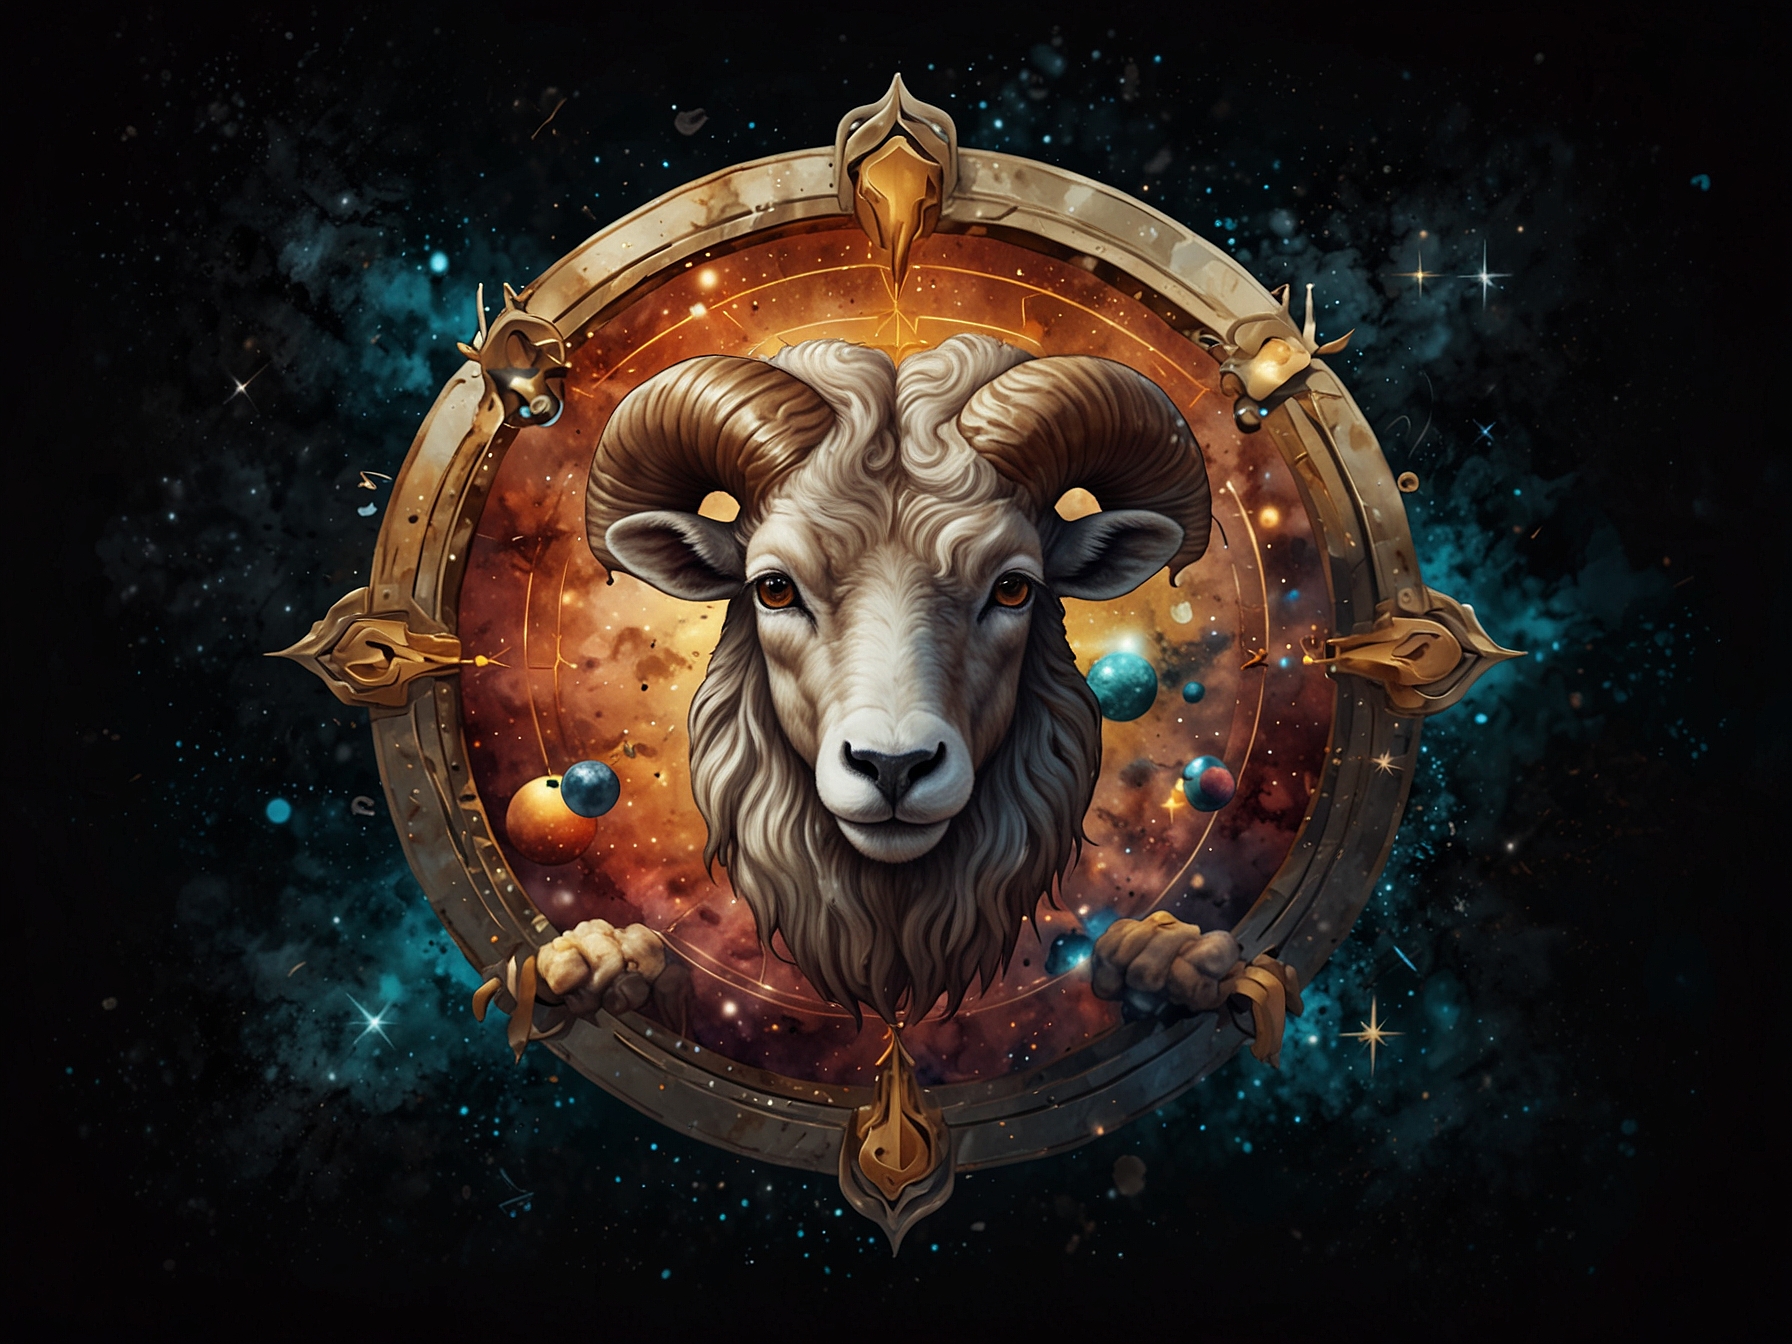 An Aries symbol surrounded by cosmic elements illustrating the universe's influence, encouraging patience and adaptability amidst unforeseen changes.